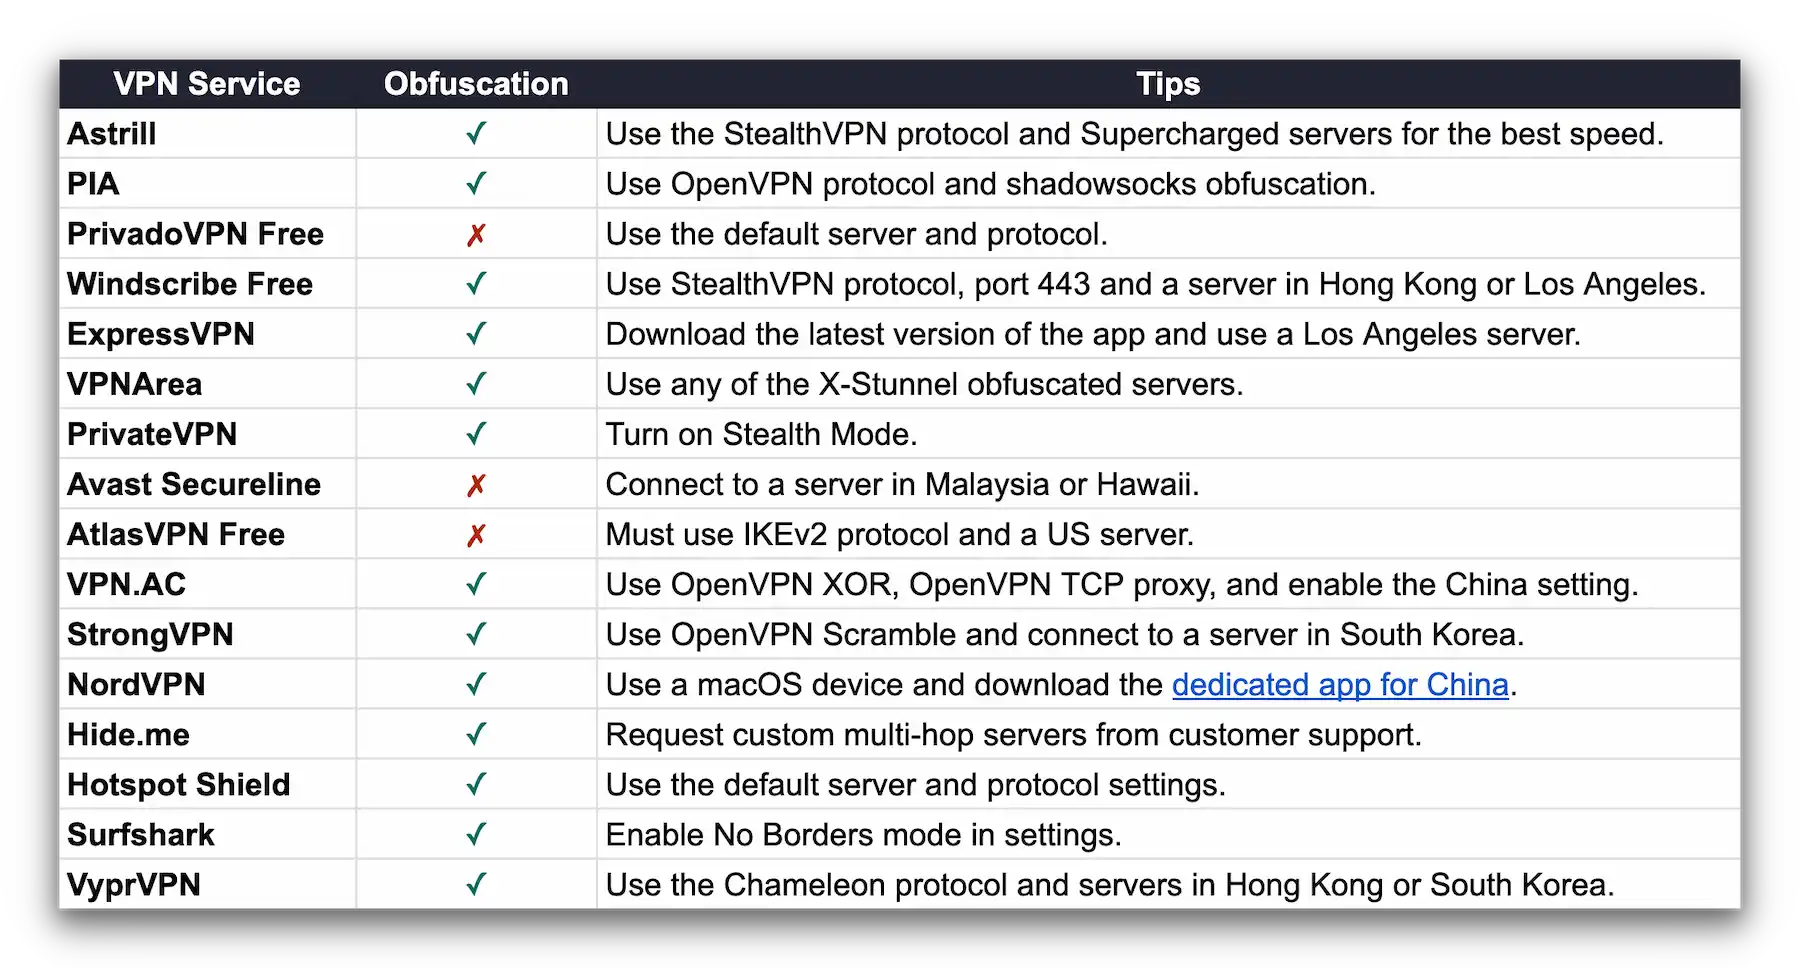 Database showing whether popular VPNs have obfuscation technology and how to enable it.